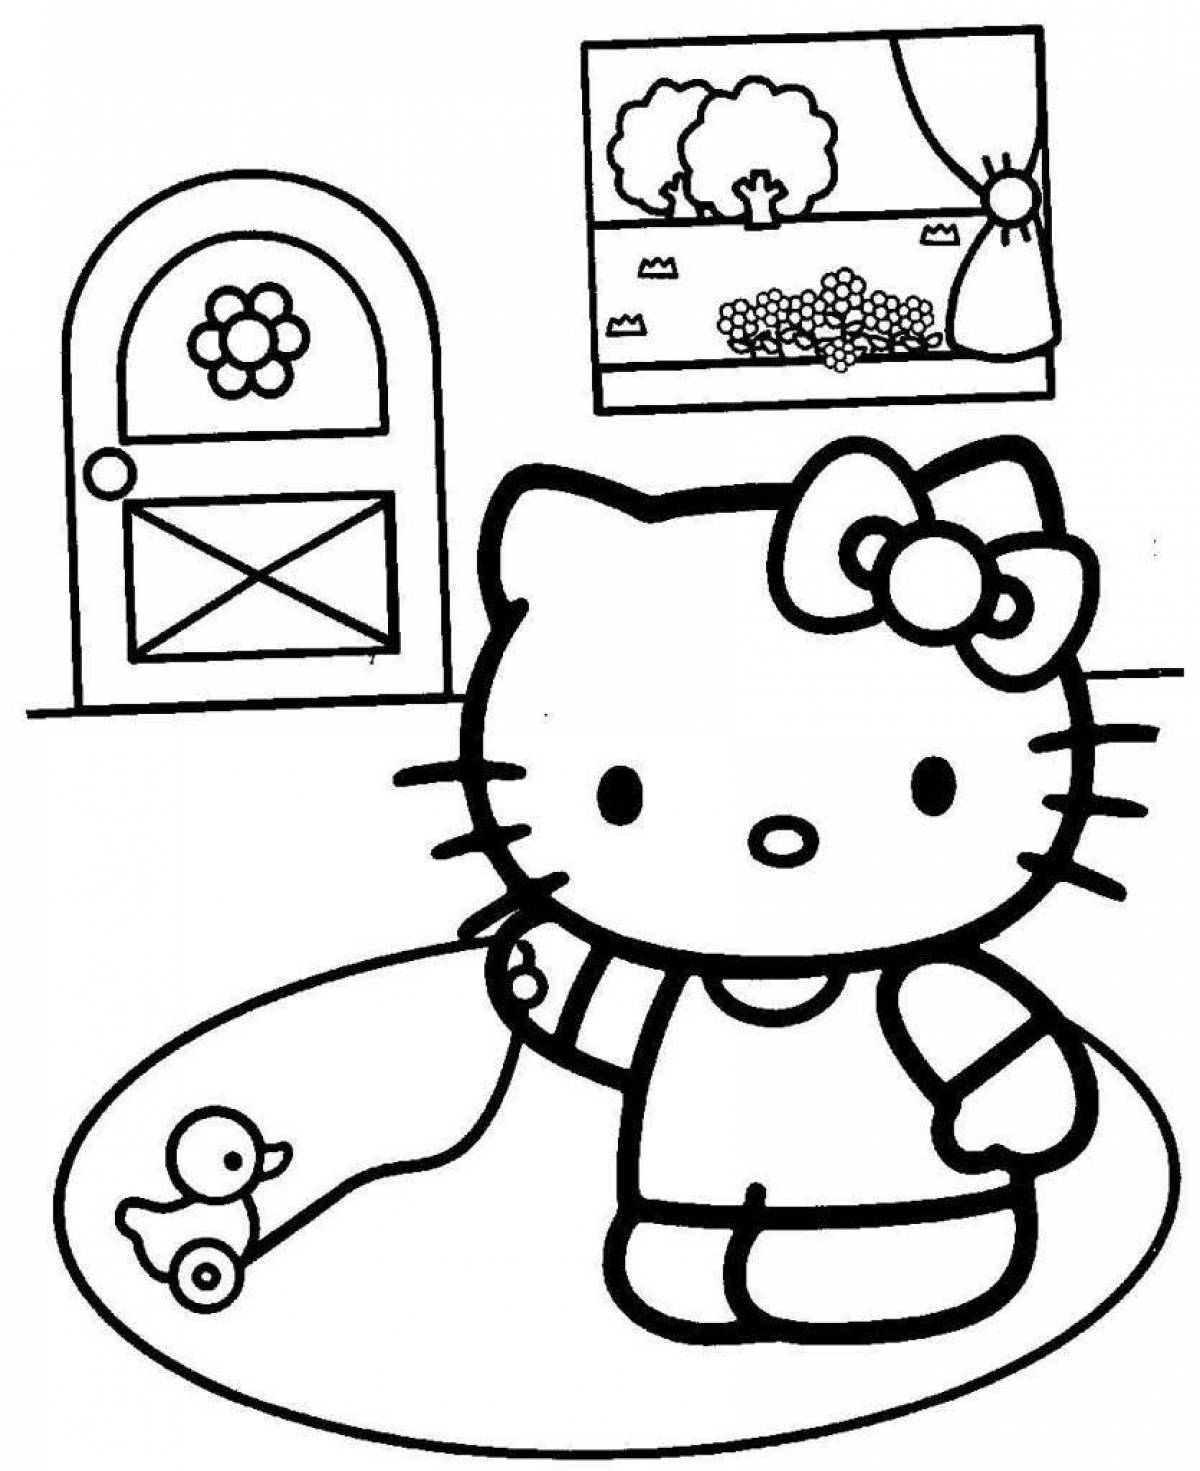 Attractive hello kitty money coloring book